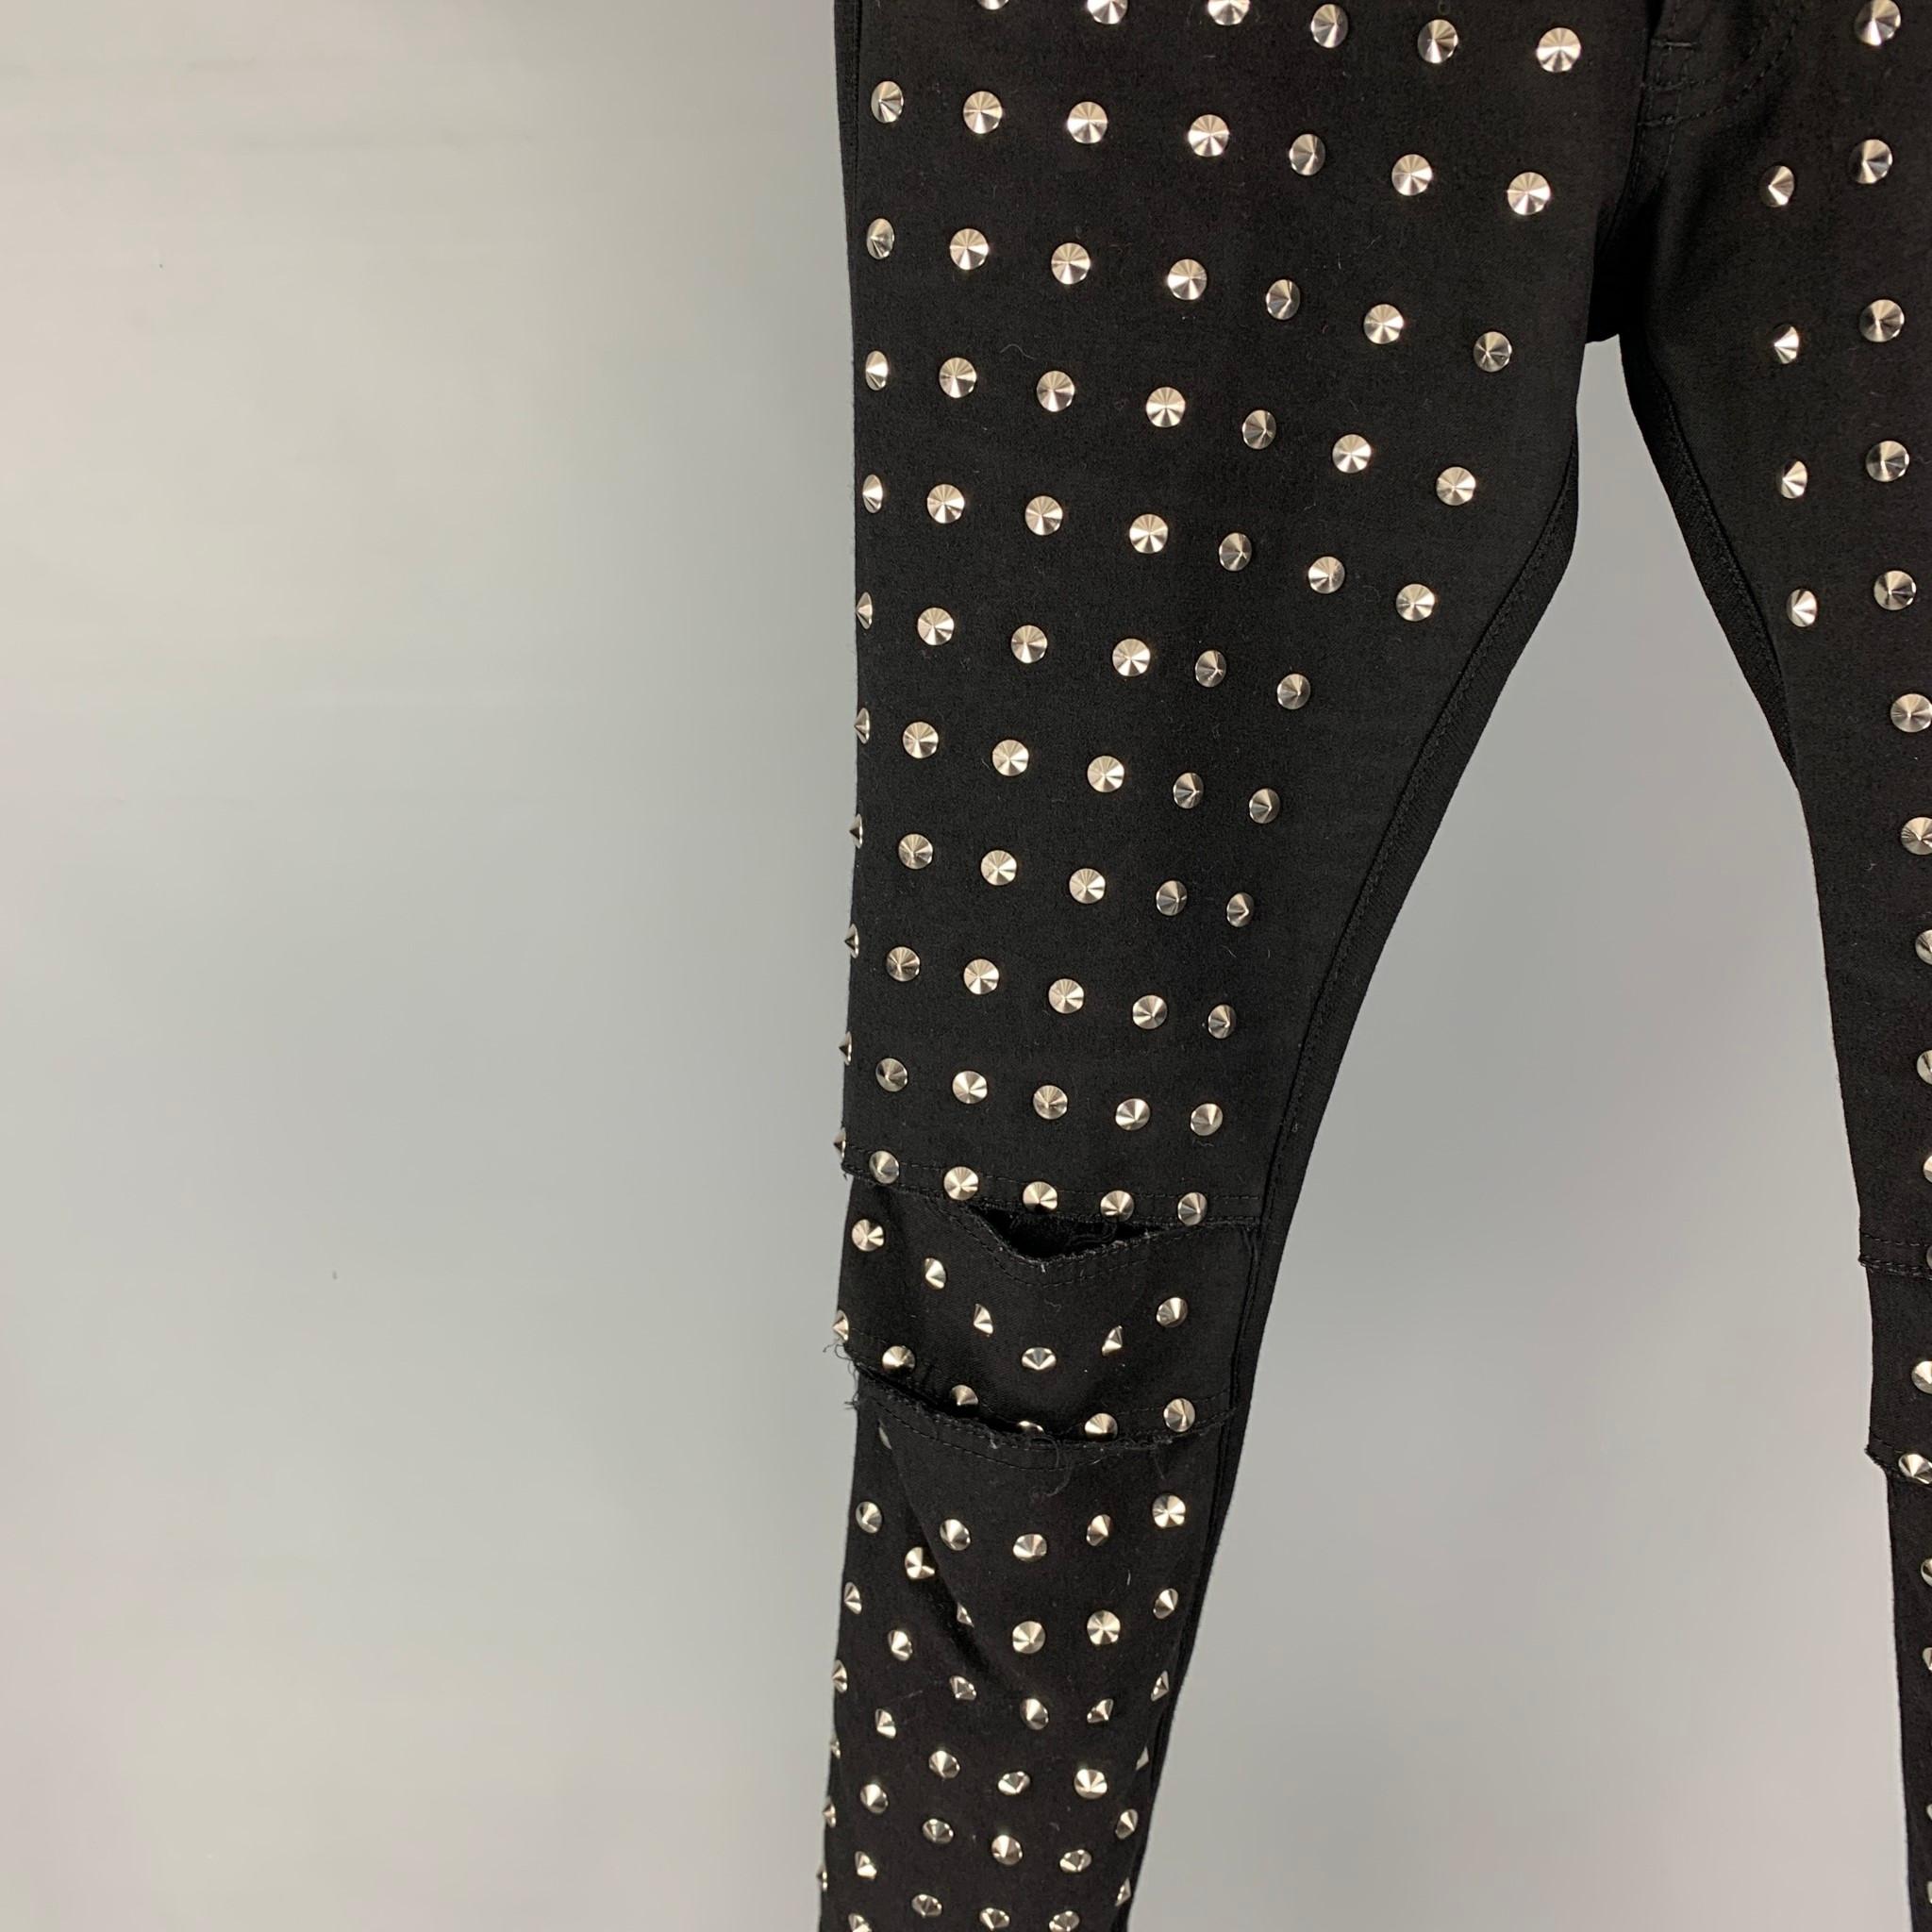 JUNYA WATANABE jeans comes in a black material featuring a low rise, skinny fit, silver tone studded details, cut-out, and a zip fly closure.

Very Good Pre-Owned Condition. Fabric tag removed.
Marked: Size tag removed.

Measurements:

Waist: 30